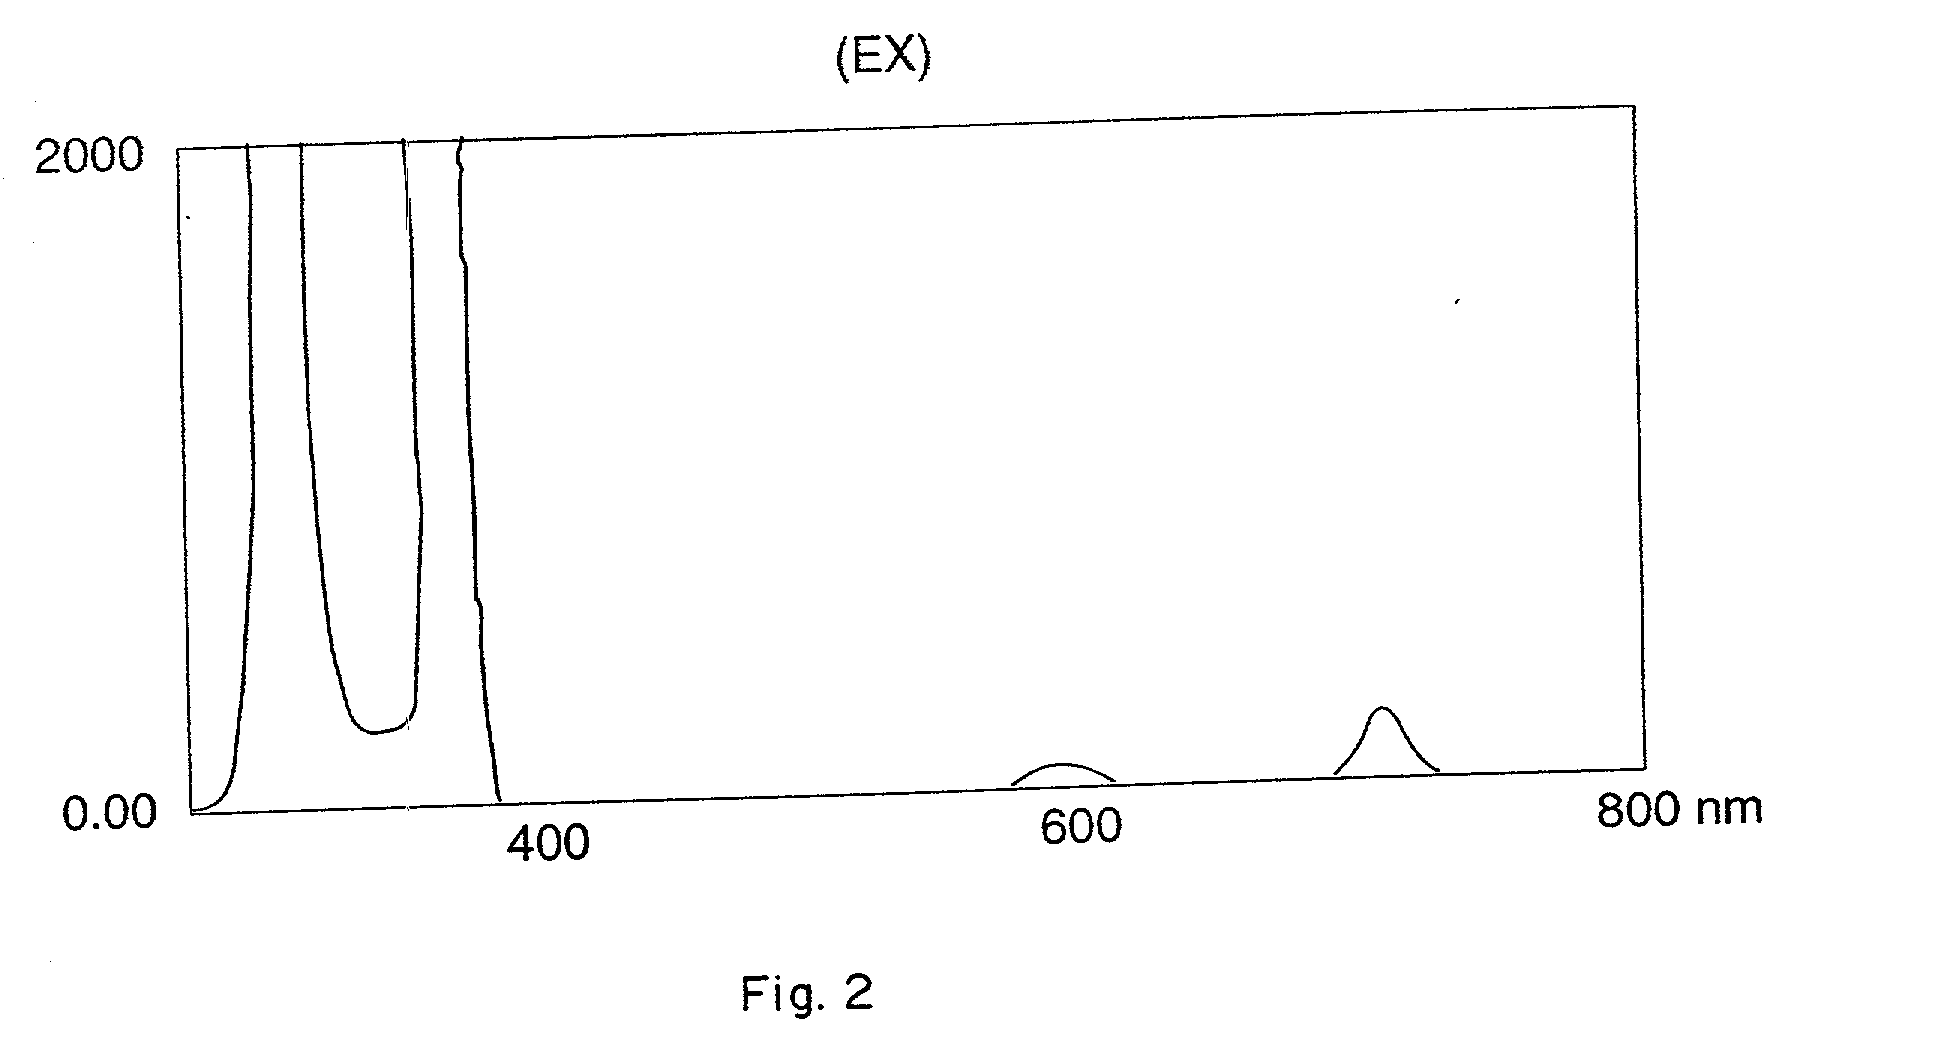 Natural nontoxic multicolor fluorescent protein dye from a marine invertebrate, compositions containing the said dye and its uses